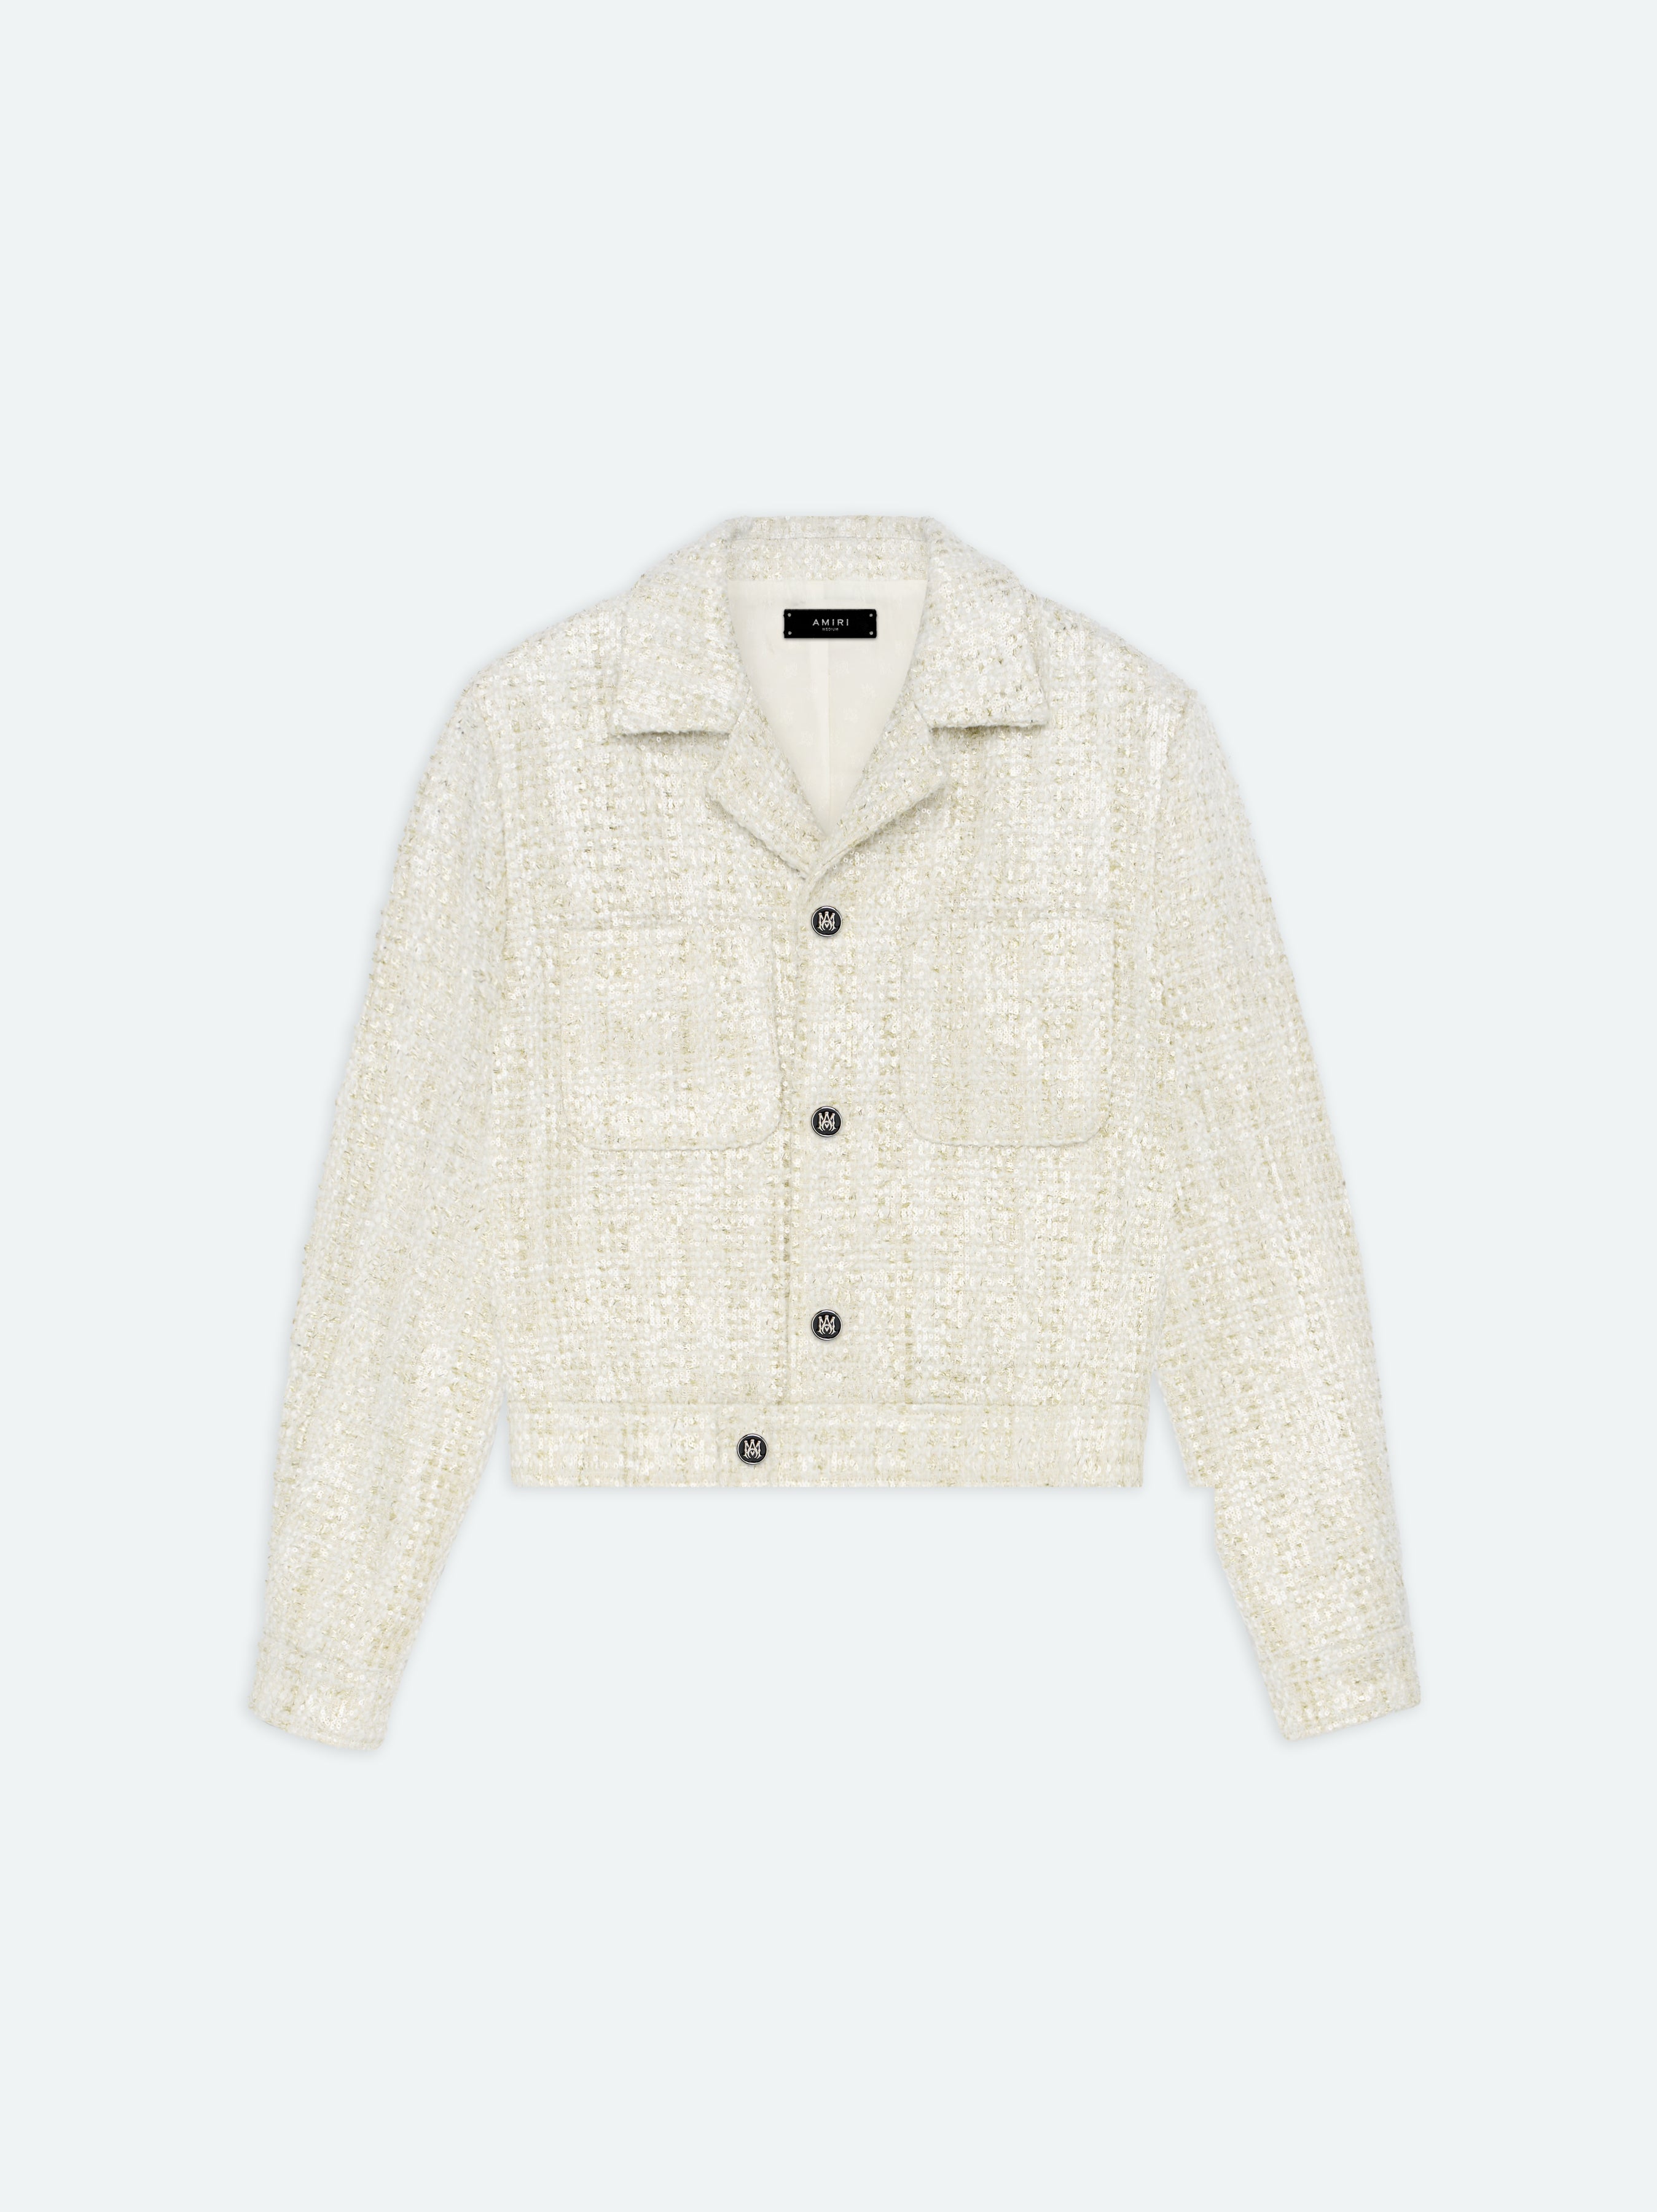 Product SEQUIN BOUCLE SHIRT JACKET - Alabaster featured image